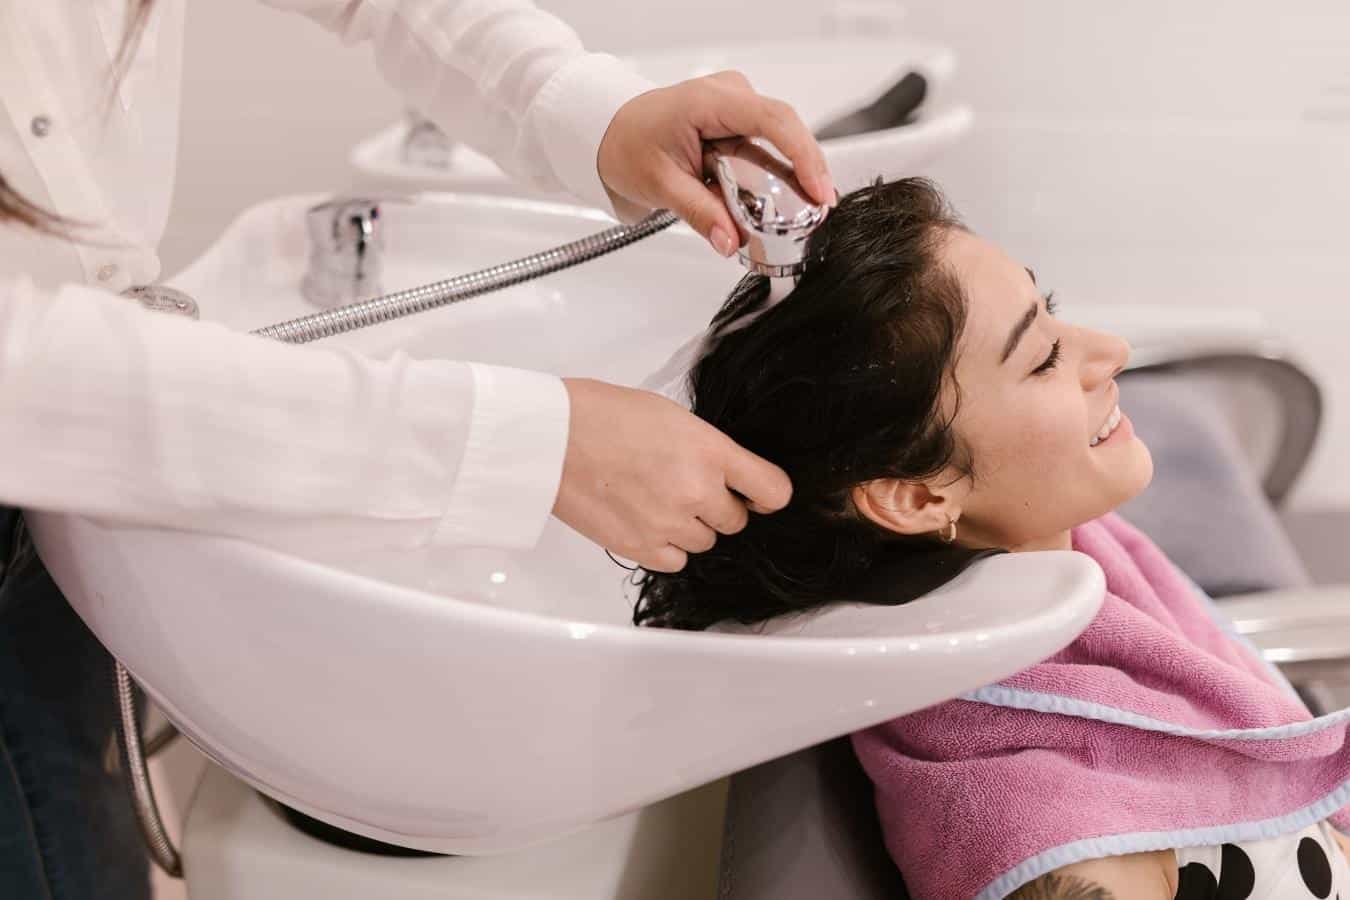 Can You Bring Your Own Shampoo To A Salon? (Answered)